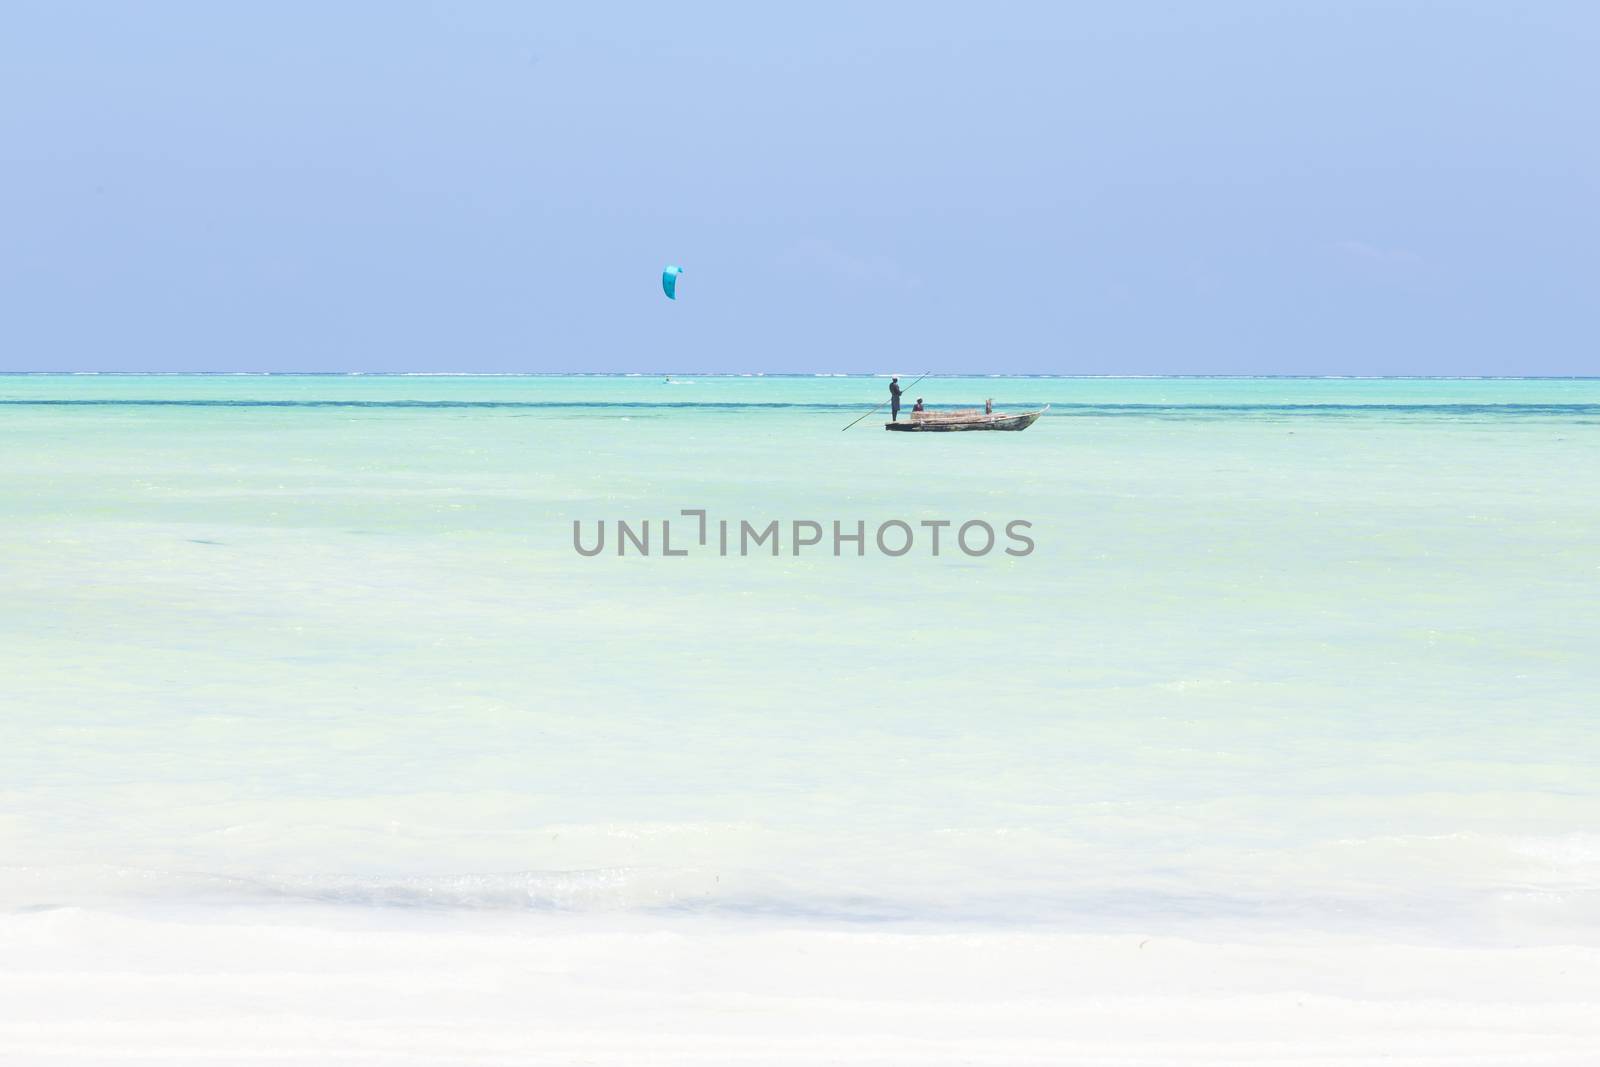 Solitary fishing boat and a kite surfer on picture perfect white sandy beach with turquoise blue sea, Paje, Zanzibar, Tanzania. Copy space.